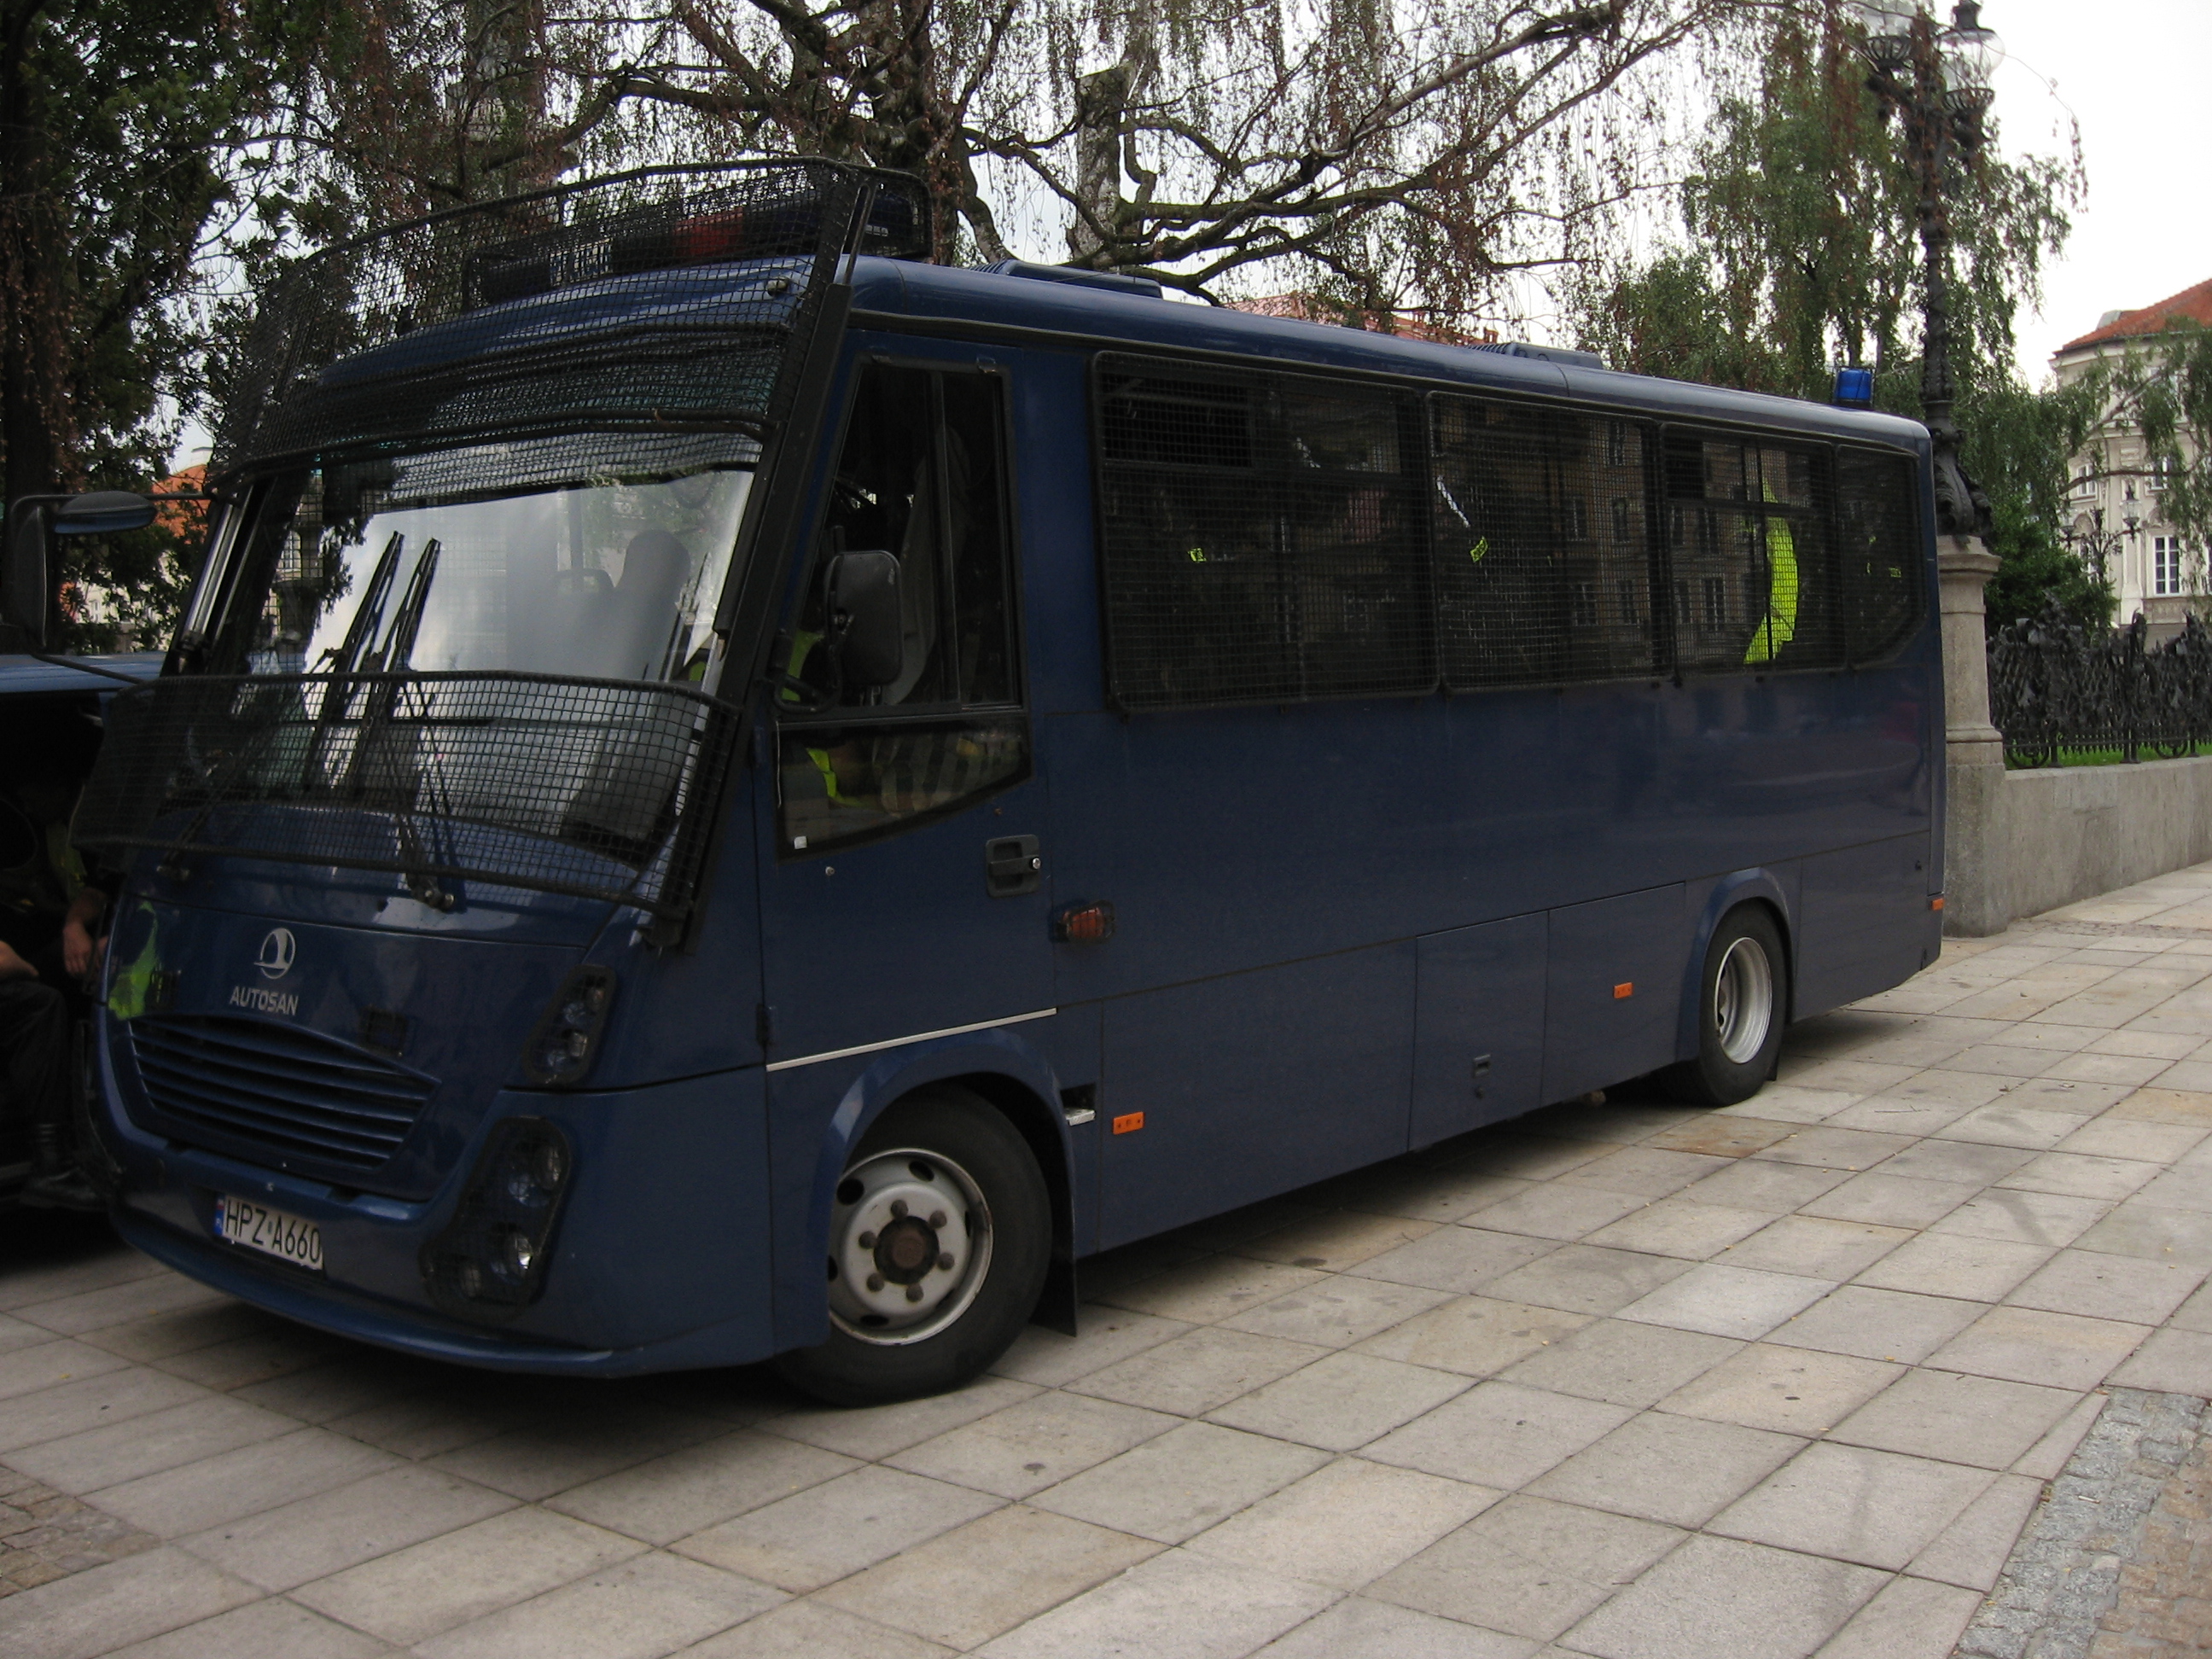 File:Autosan H7-10I police bus of the Polish Police in Warsaw.jpg ...